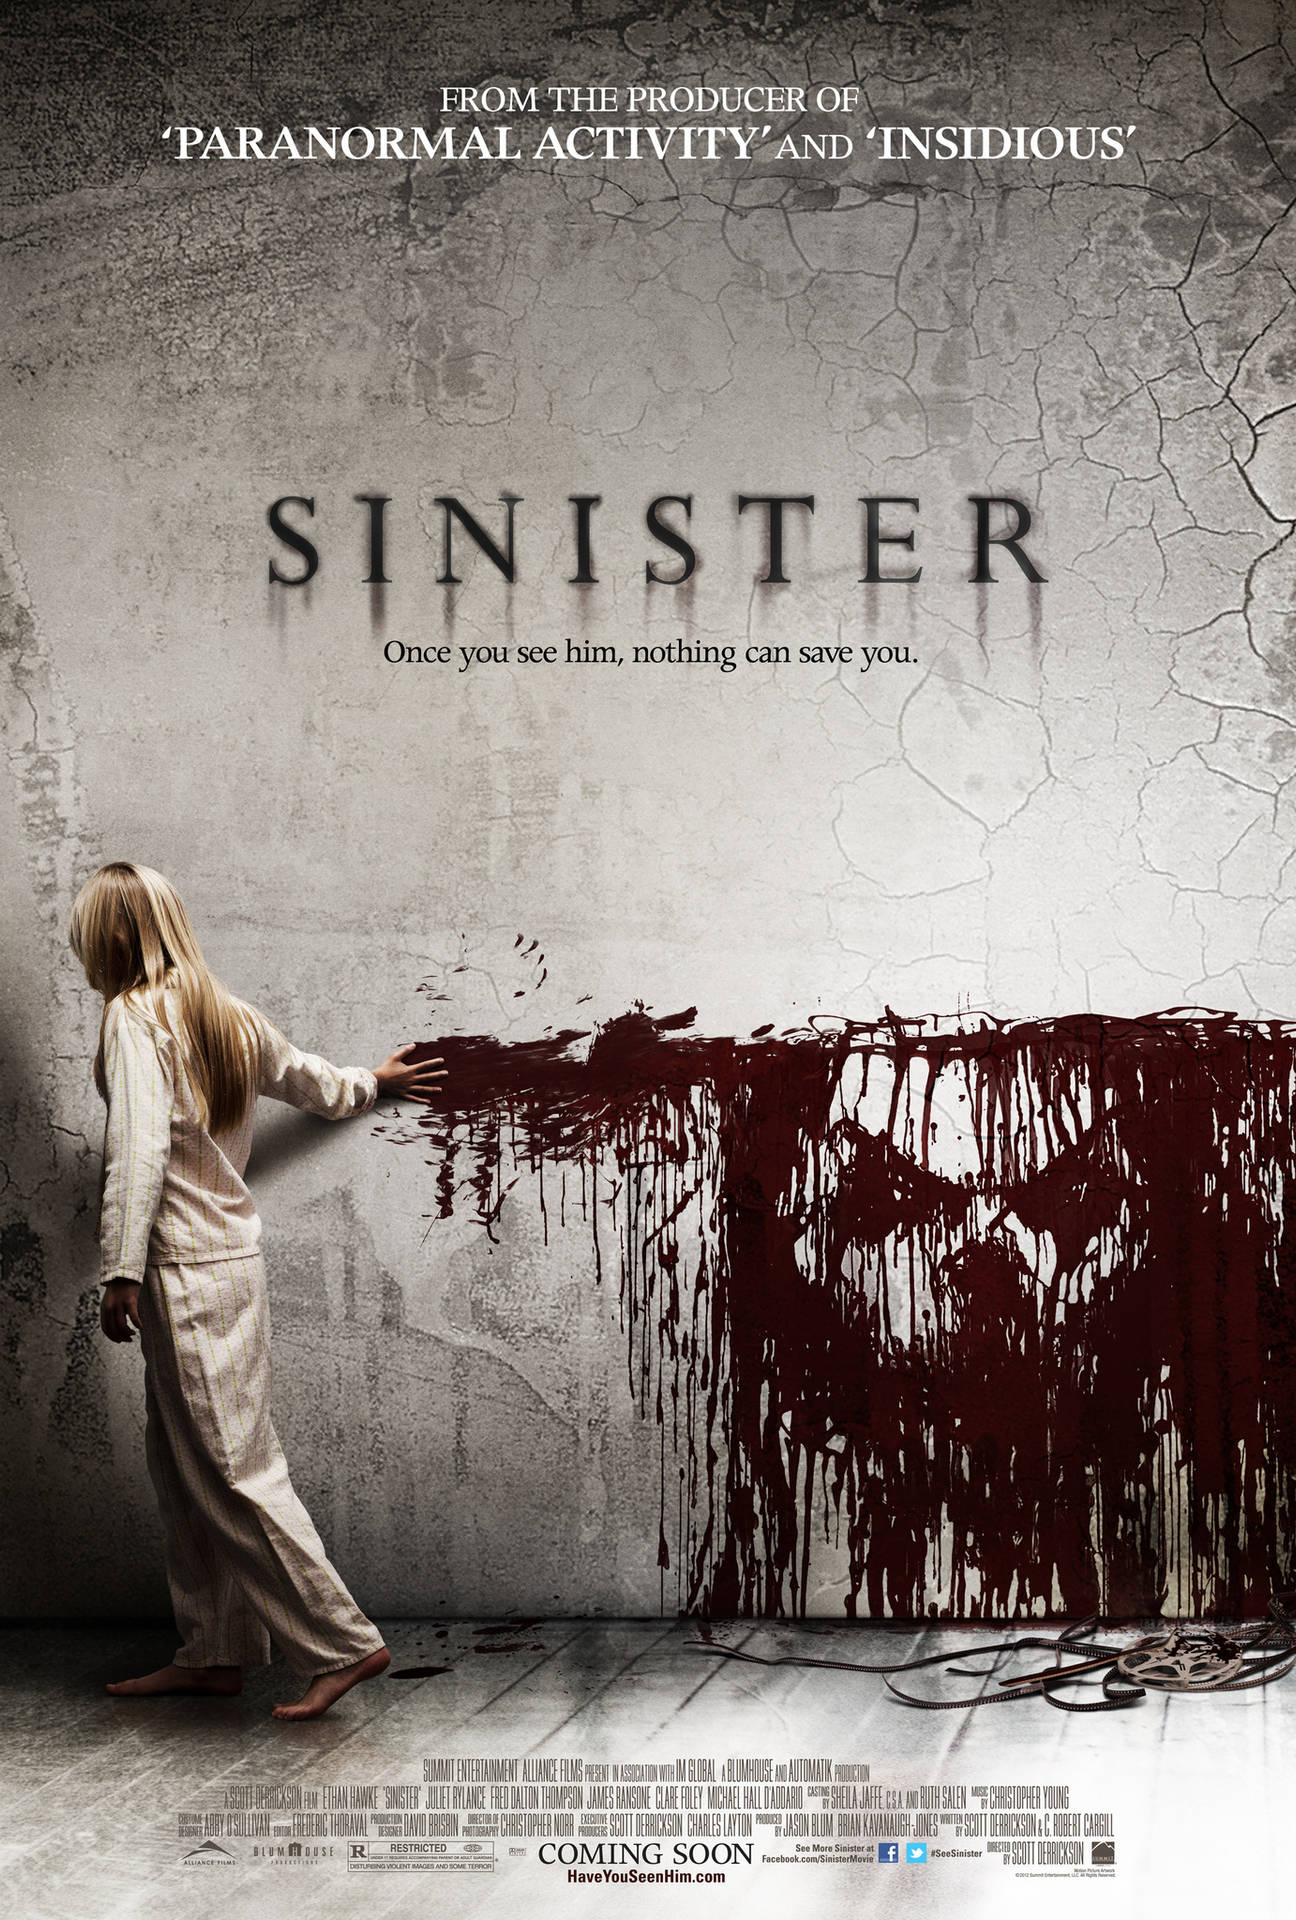 Sinister (2012) Official Movie Poster Background